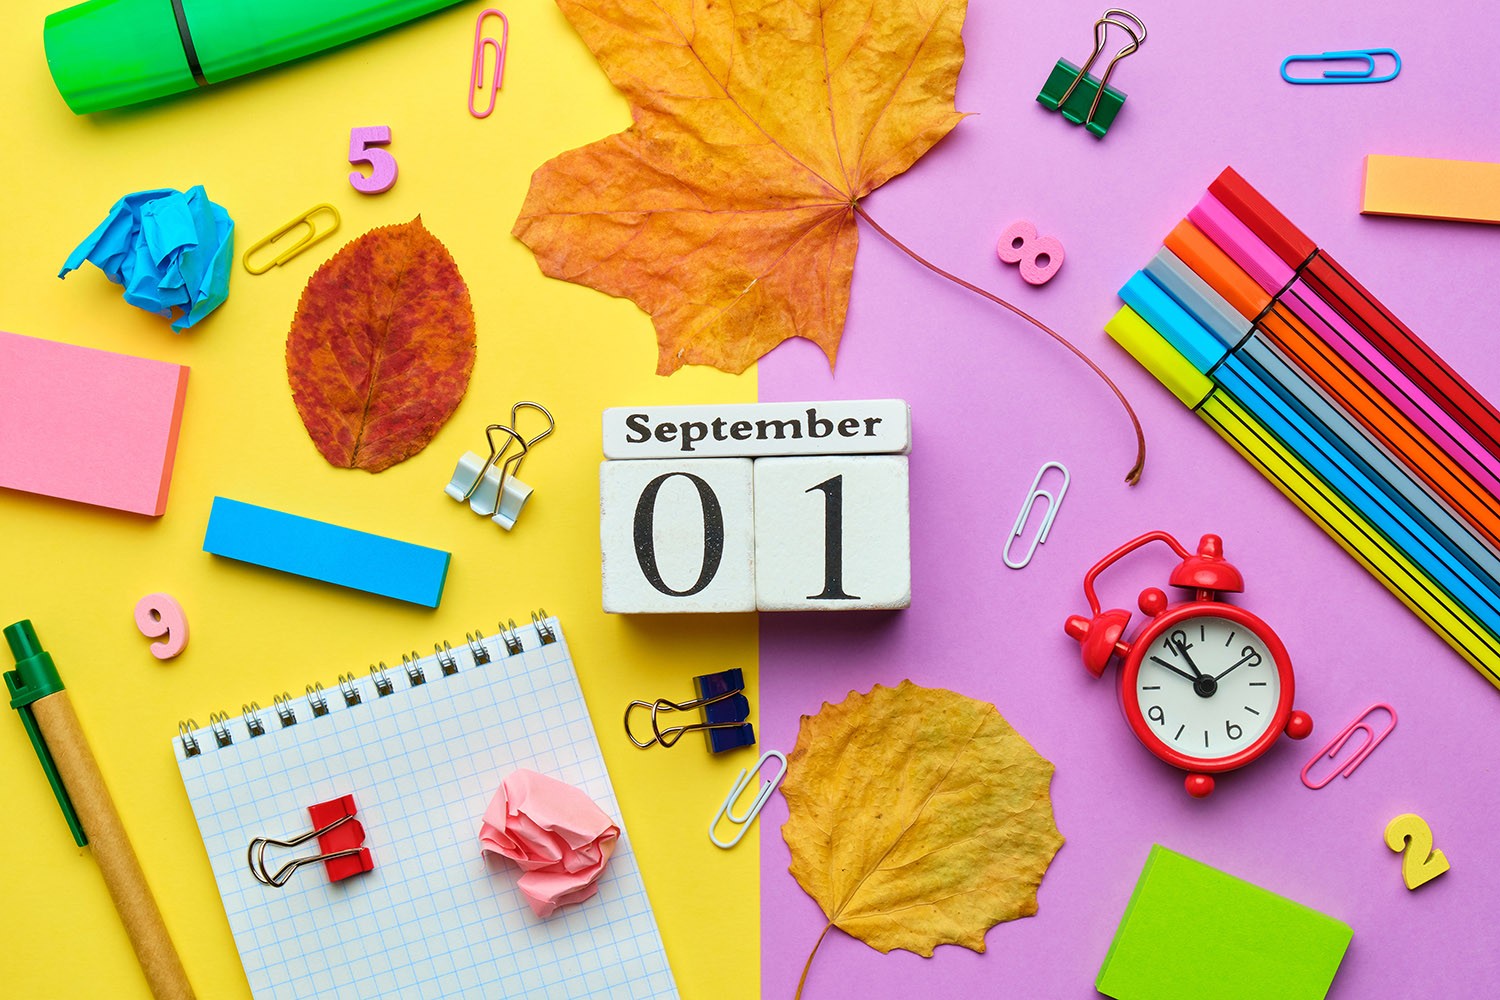 Calendar icon surrounded by leaves, pencils and other school supplies.